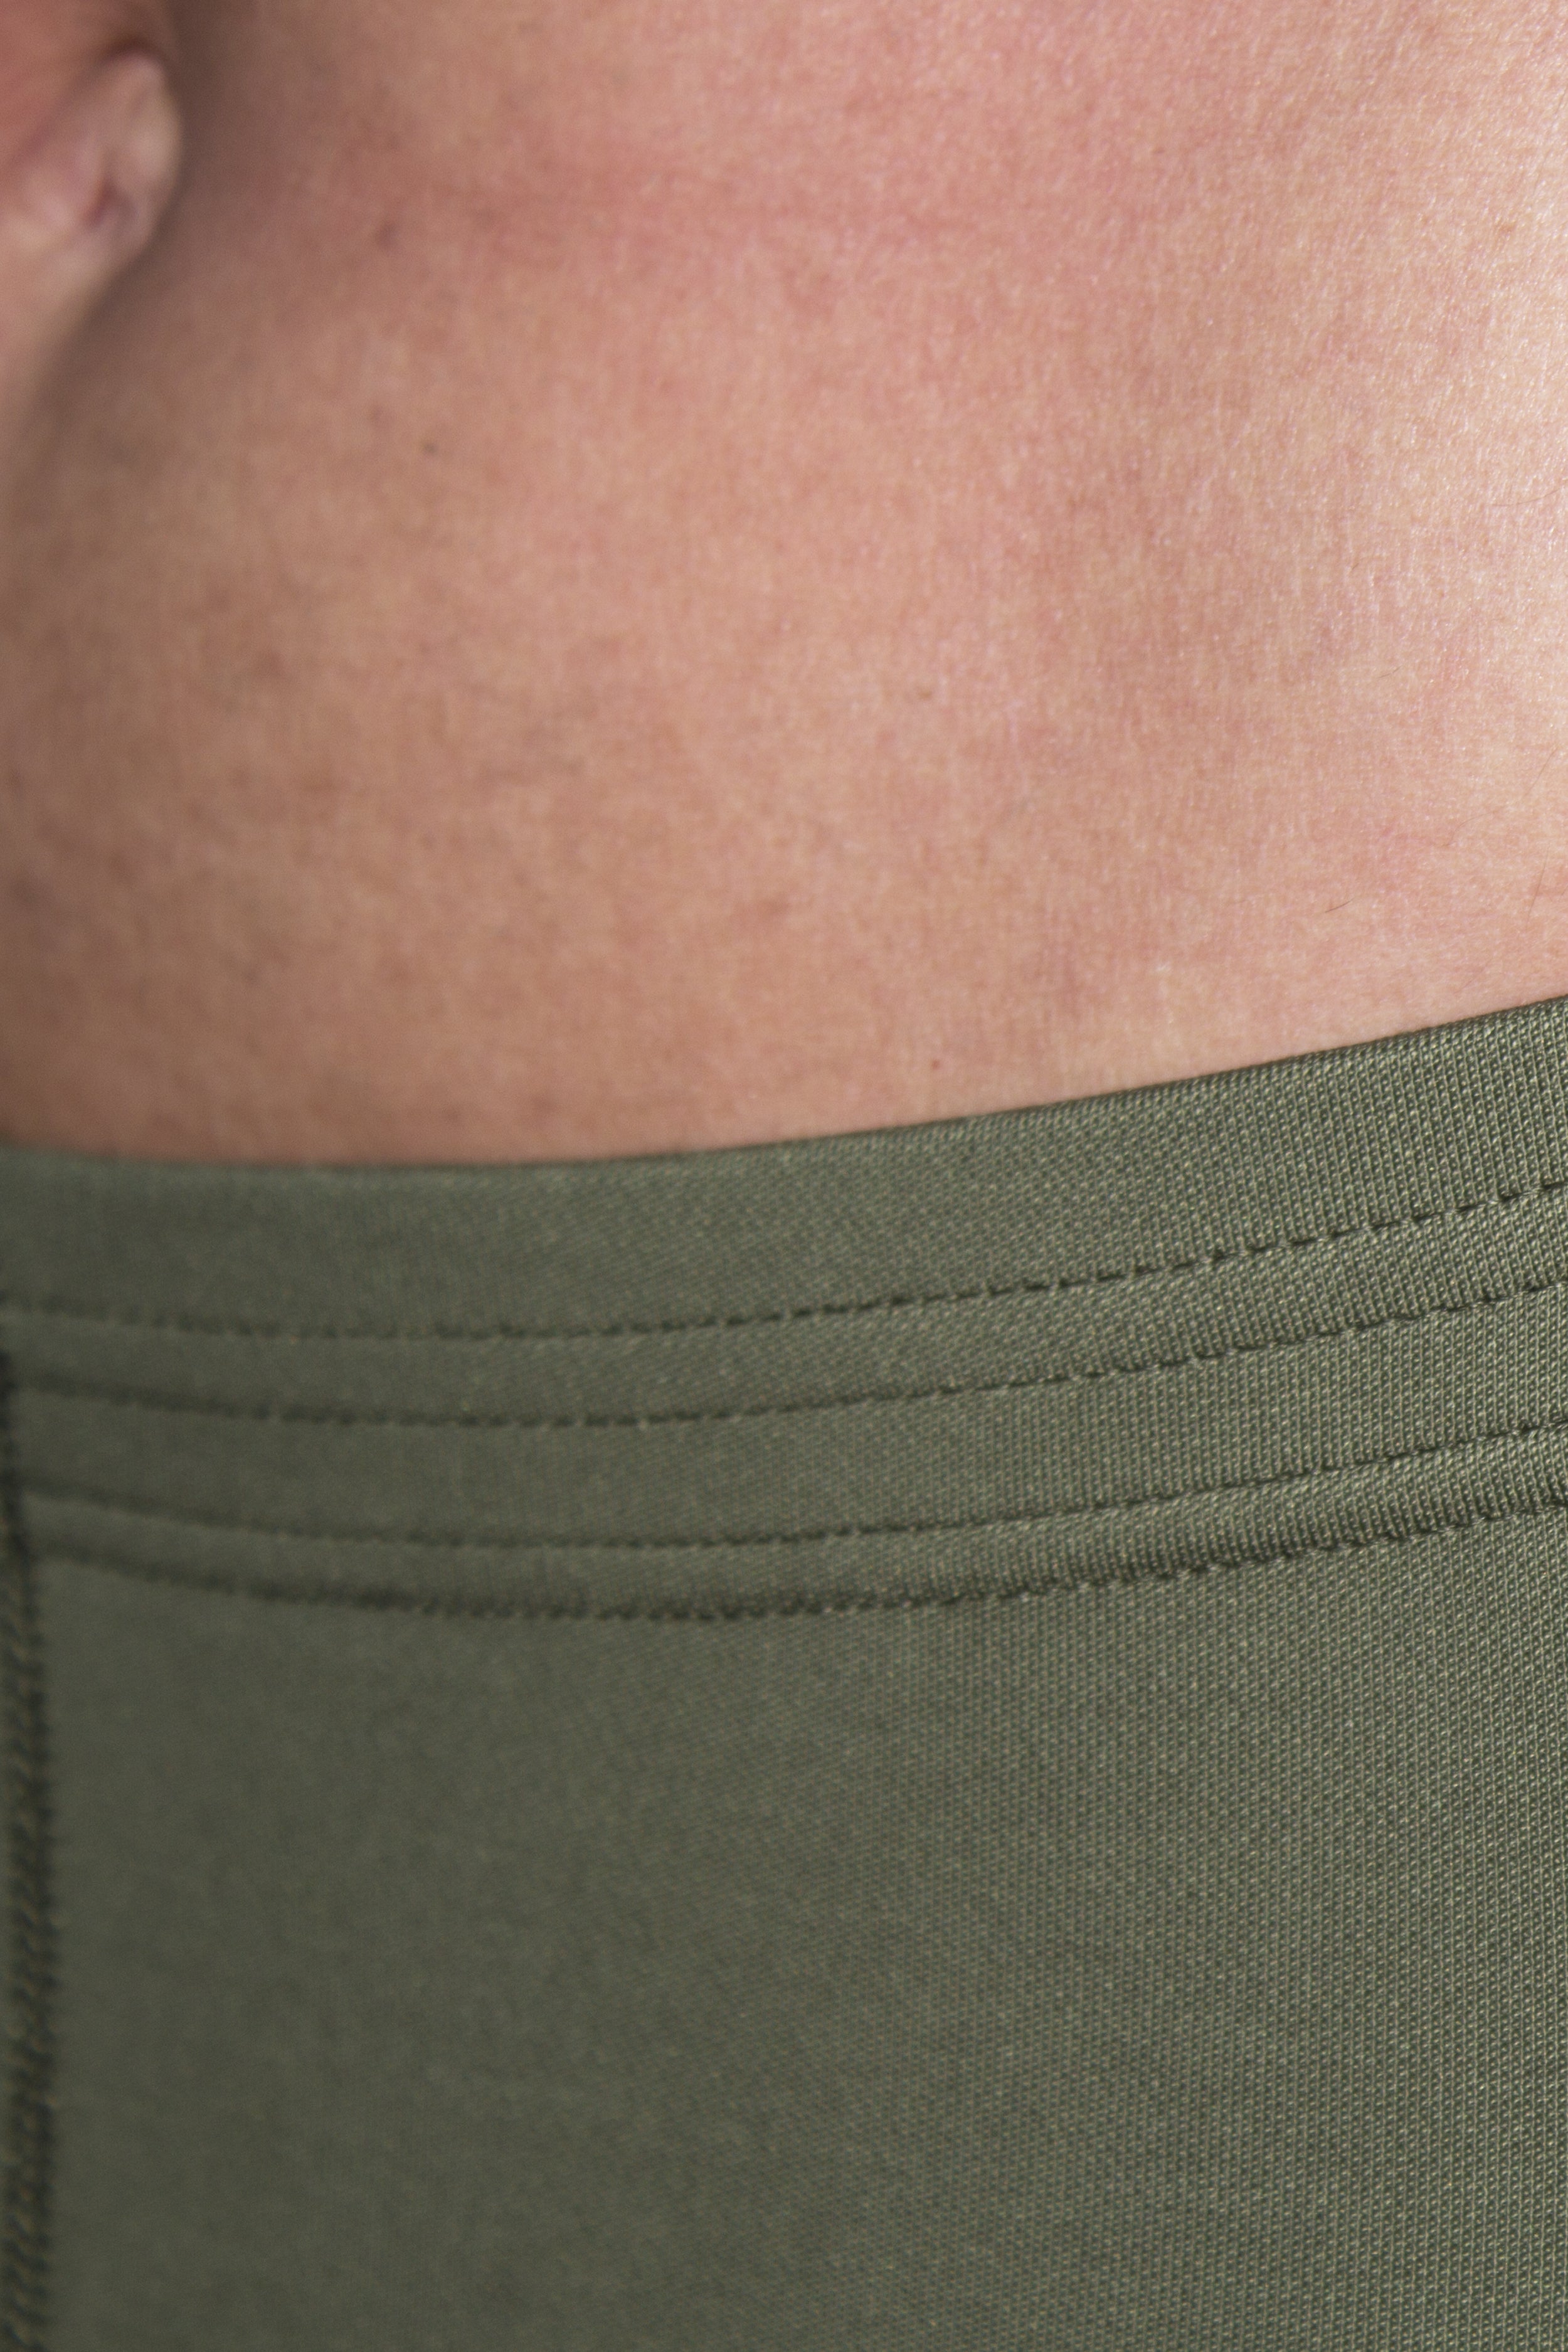 Army thermal combat underpants